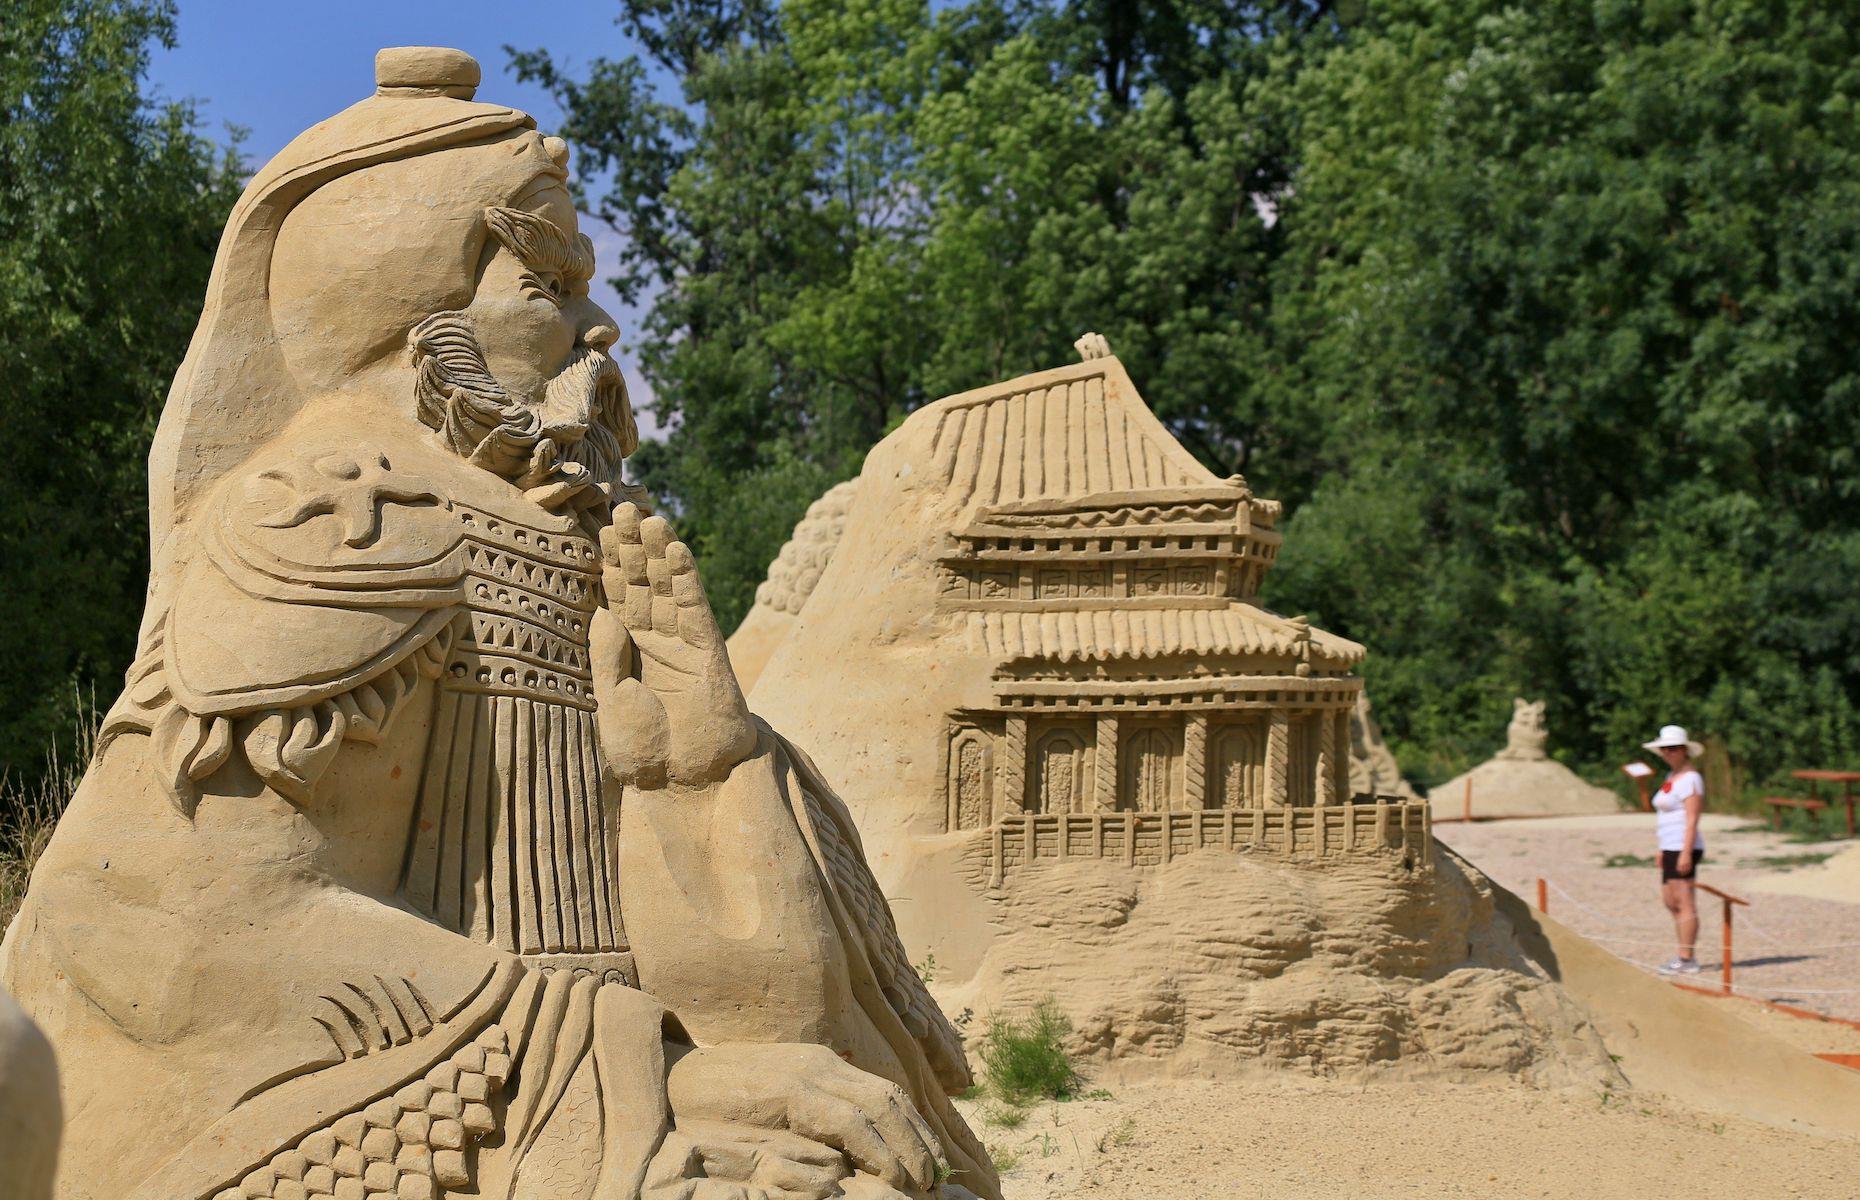 Imperial palaces, lavish temples and formidable emperors formed part of the grandiose display at a sand festival held in Lednice, Czech Republic, in 2015. Pictured here is the Chinese Emperor Qin, the first sovereign emperor, who was the work of artist Michal Olšiak and his team. With a theme of ancient China, sand replicas of the Terracotta Army and the Forbidden City were also created.